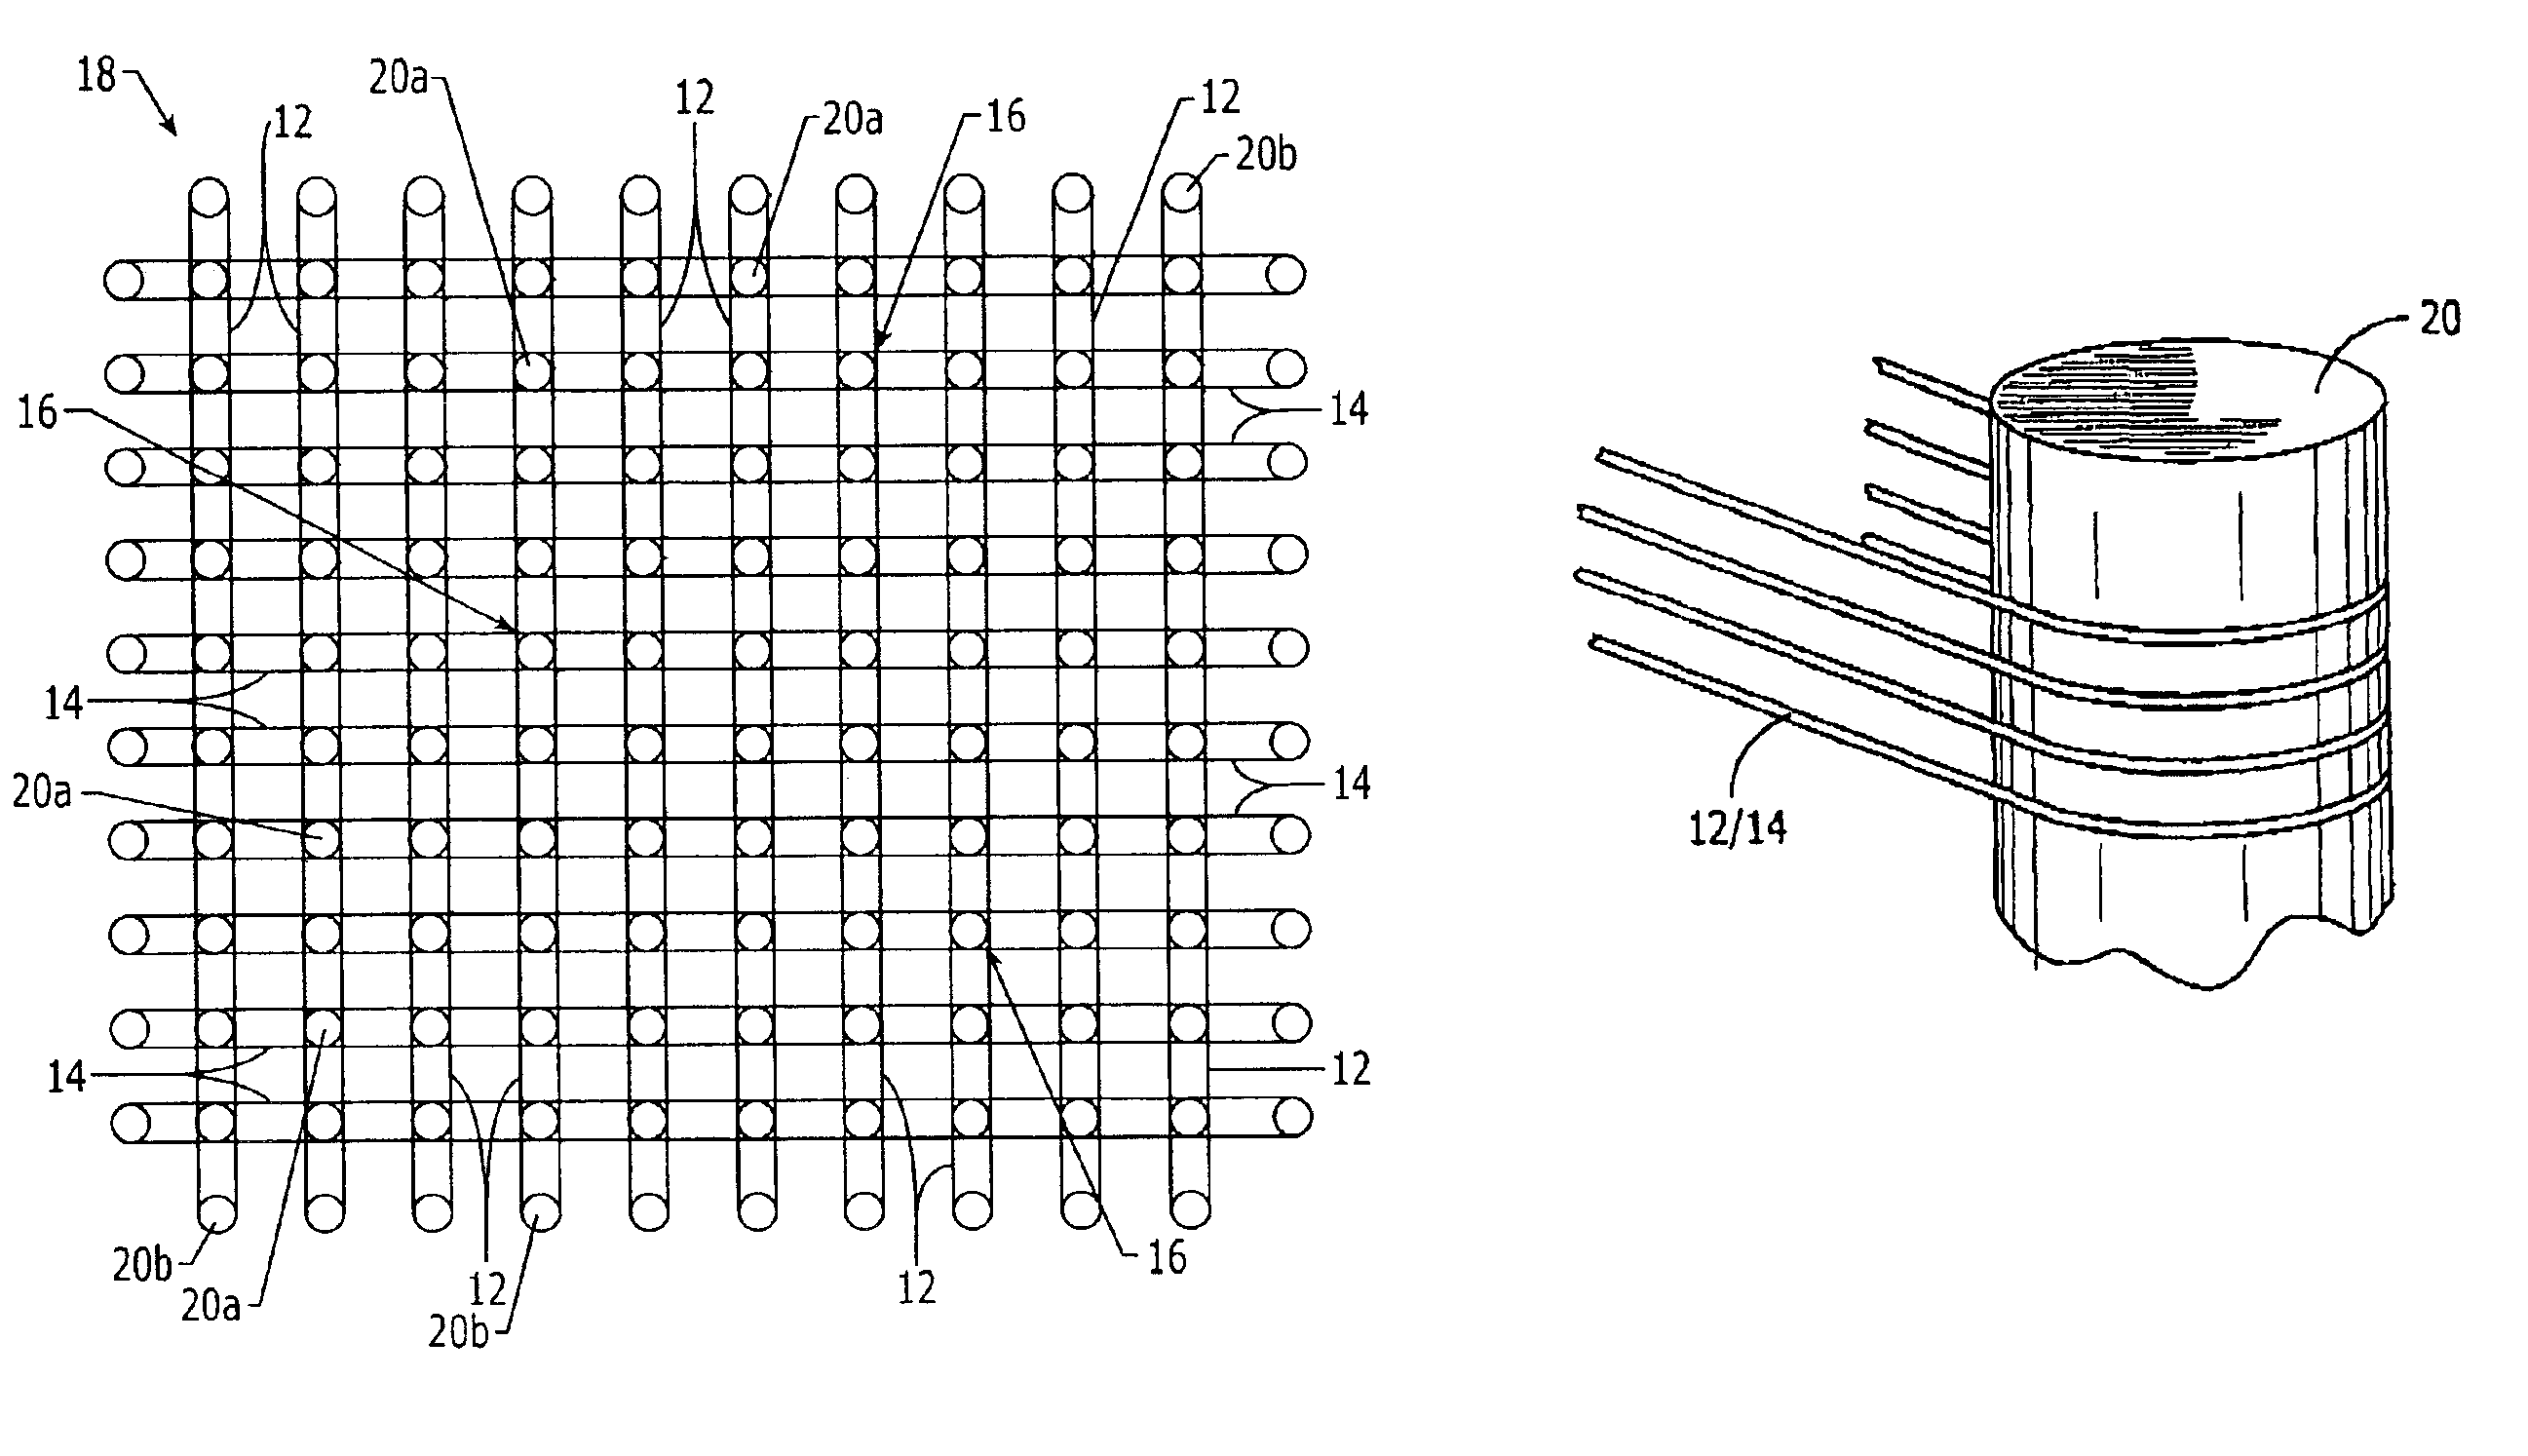 Eddy current probe having sensing elements defined by first and second elongated coils and an associated inspection method